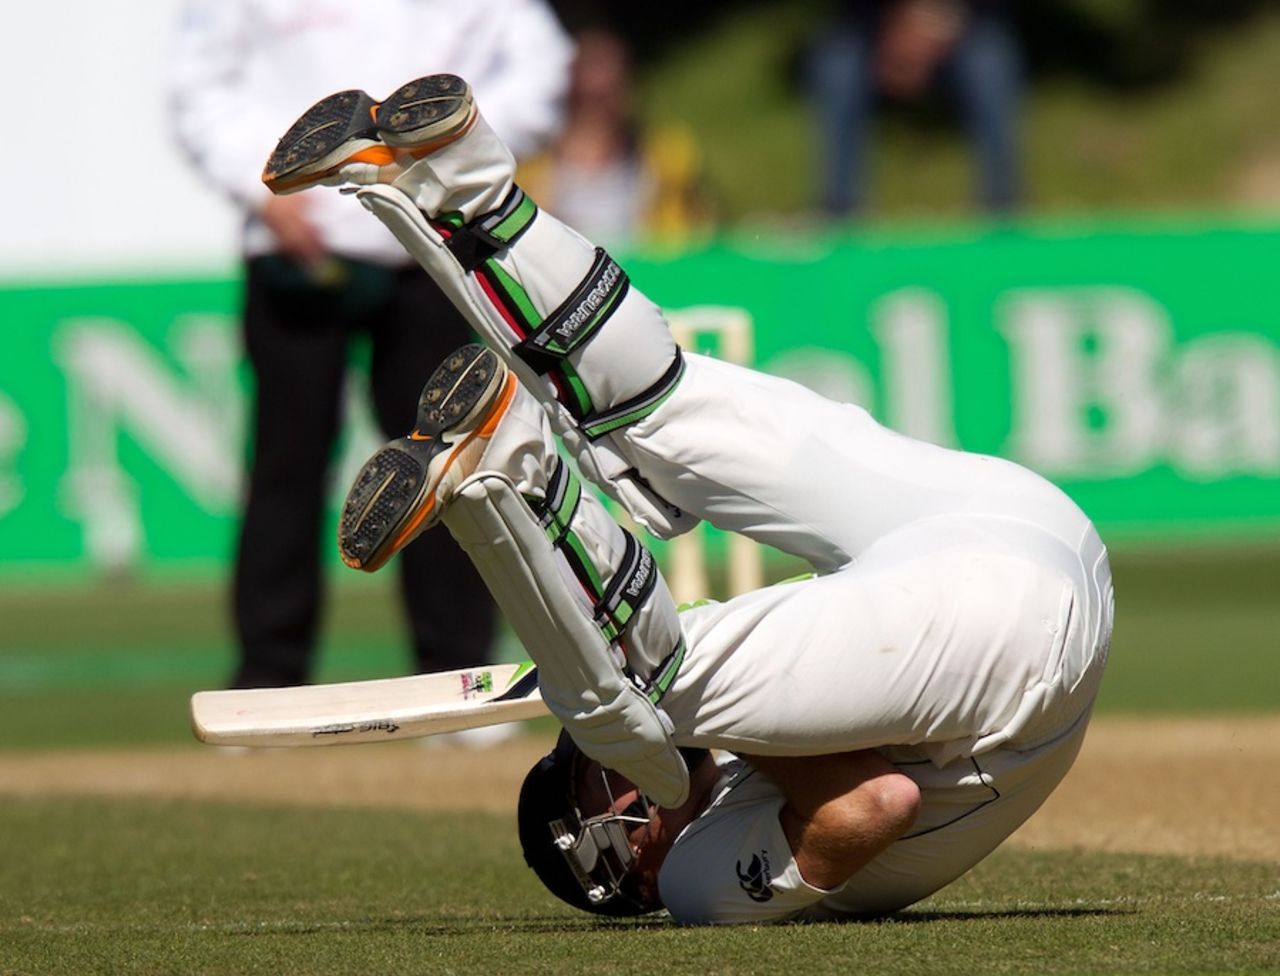 Martin Guptill is floored by a bouncer, New Zealand v South Africa, 3rd Test, Wellington, 5th day, March 27, 2012